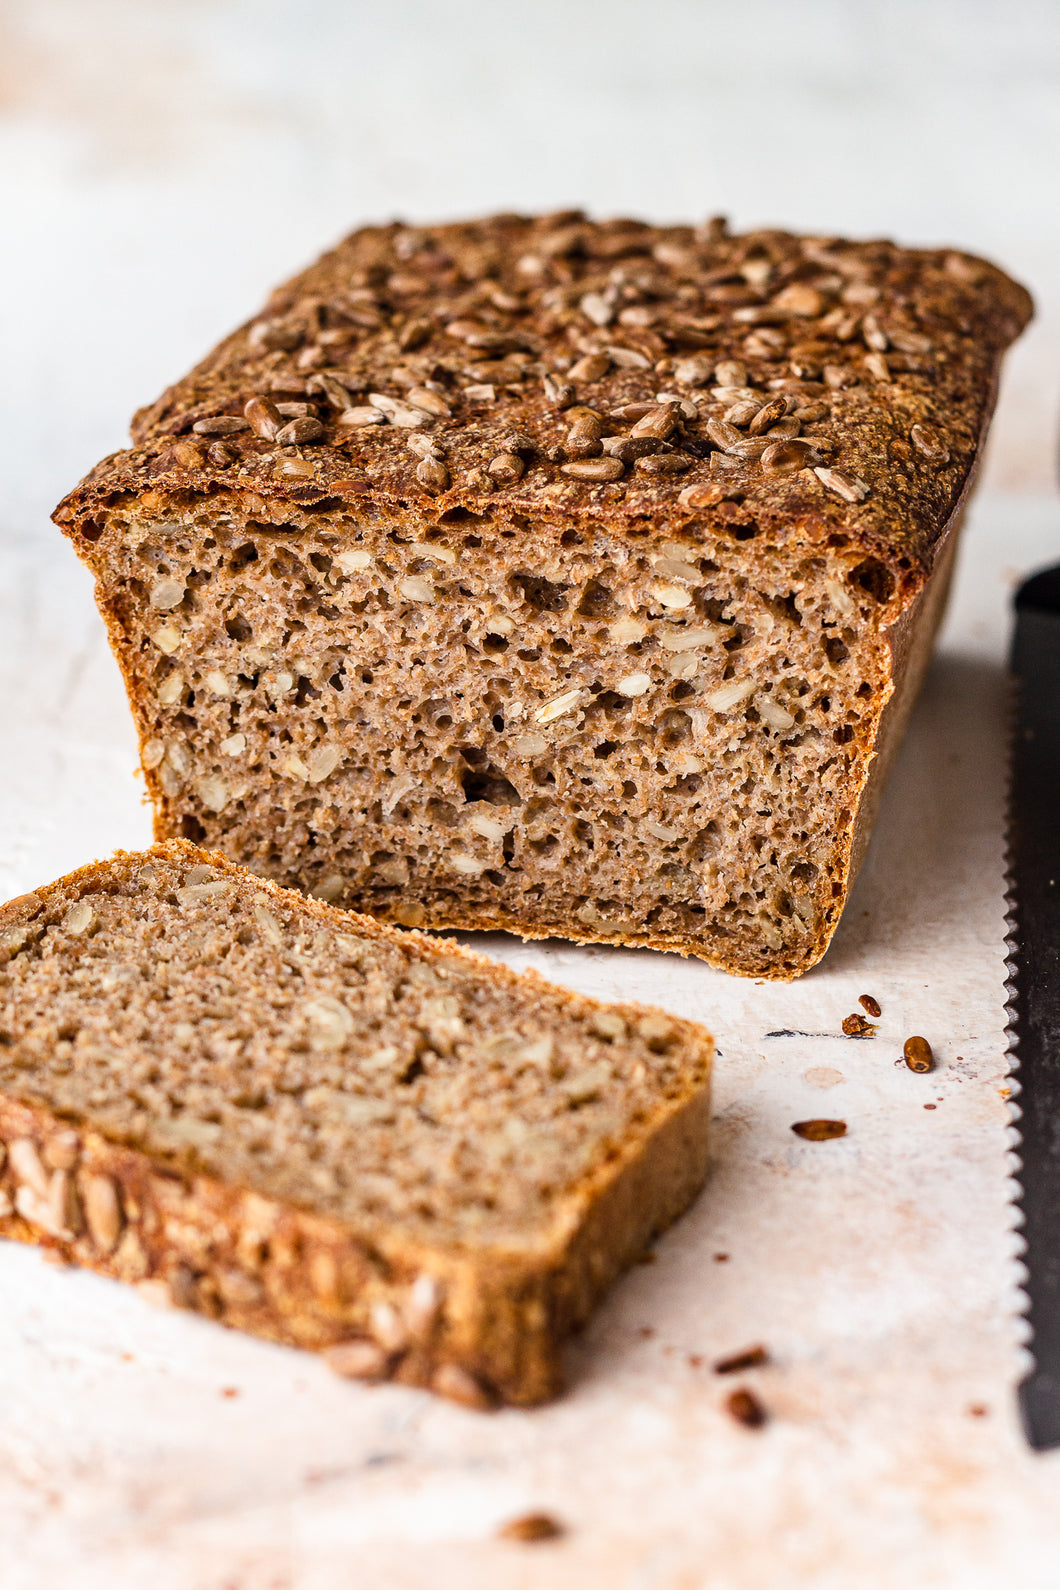 MIXED RYE BREAD WITH OIL SEEDS